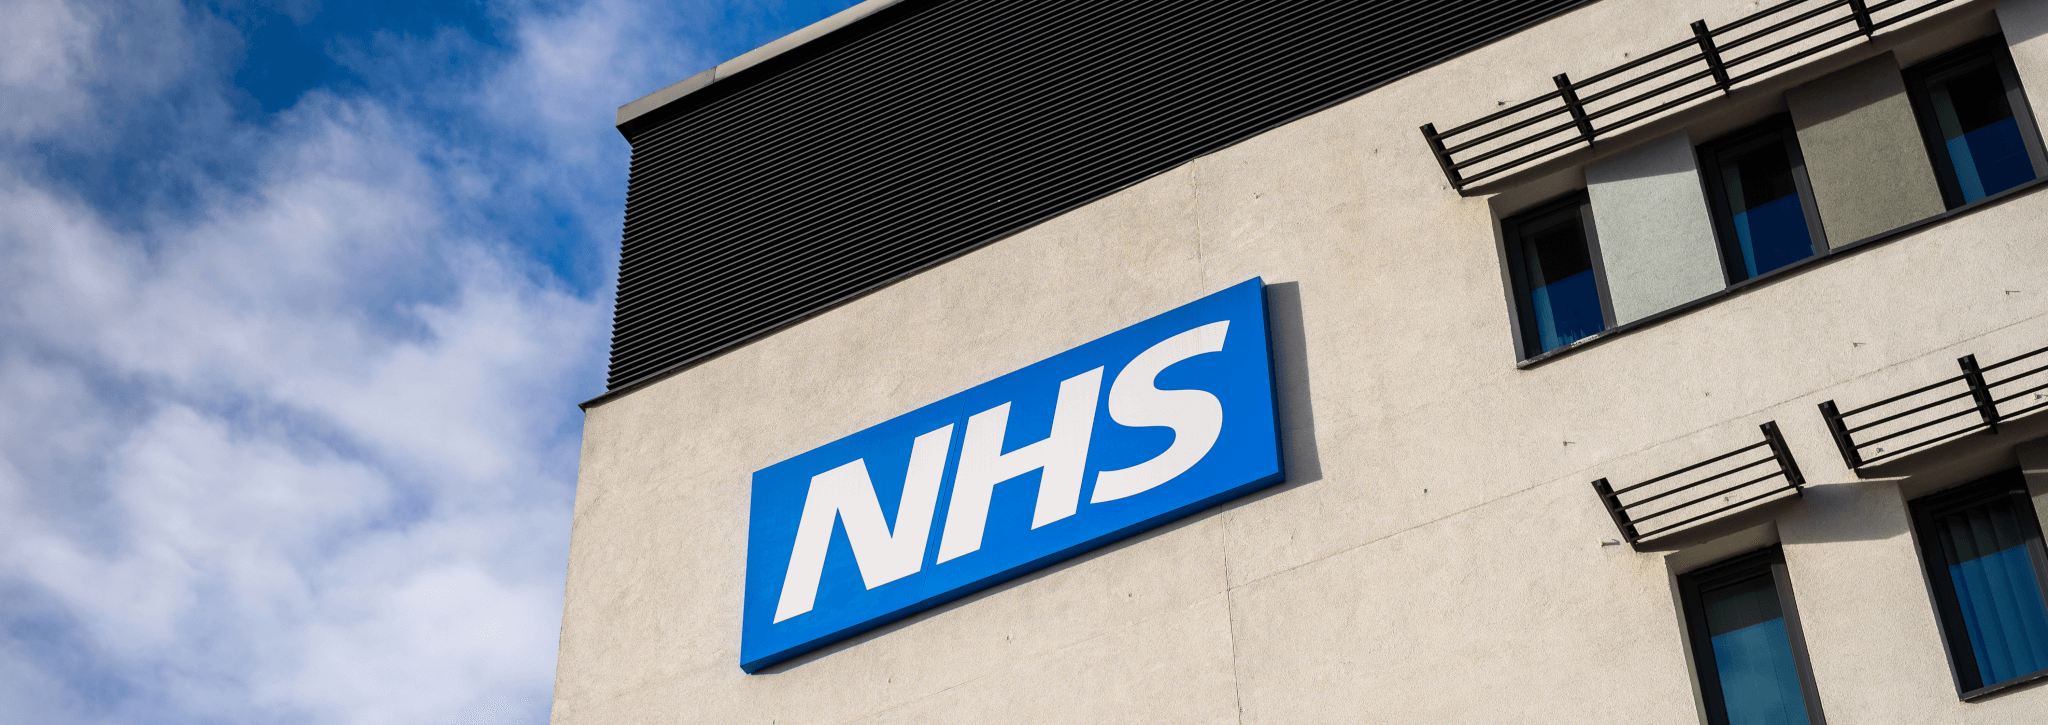 NHS could need £30bn every decade to cope with increased demands